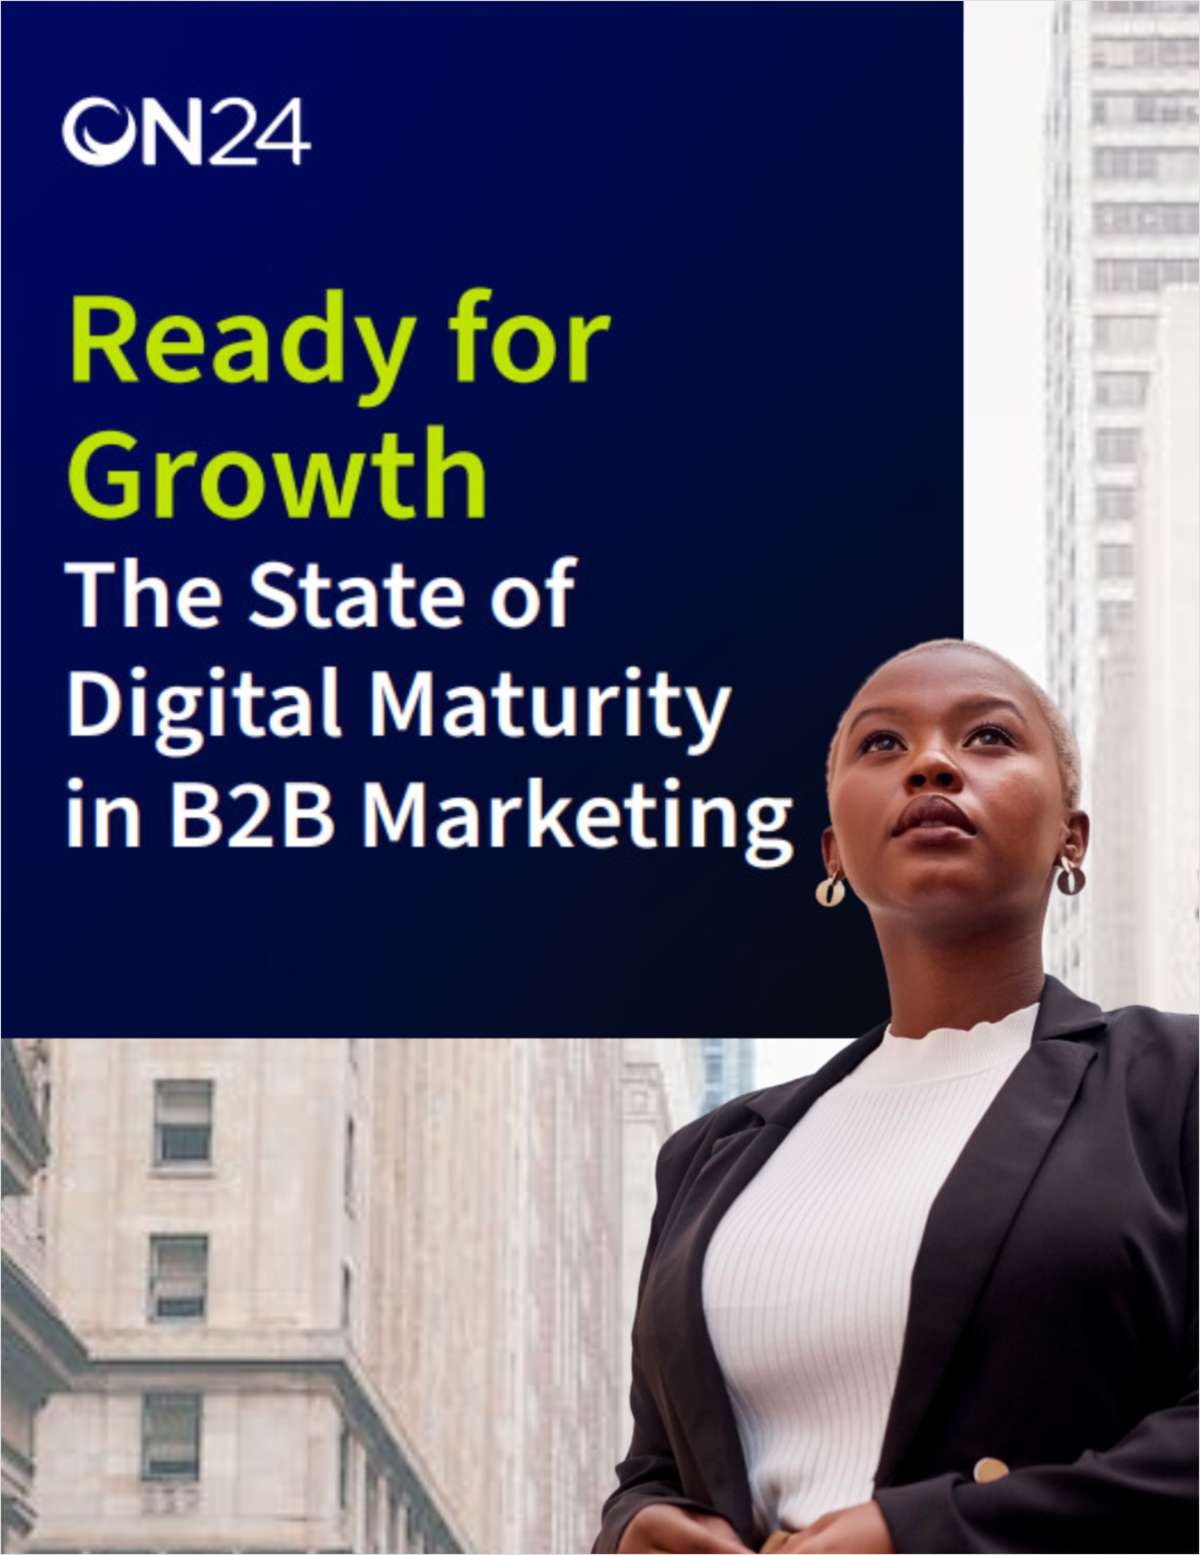 Ready for Growth: The State of Digital Maturity in B2B Marketing